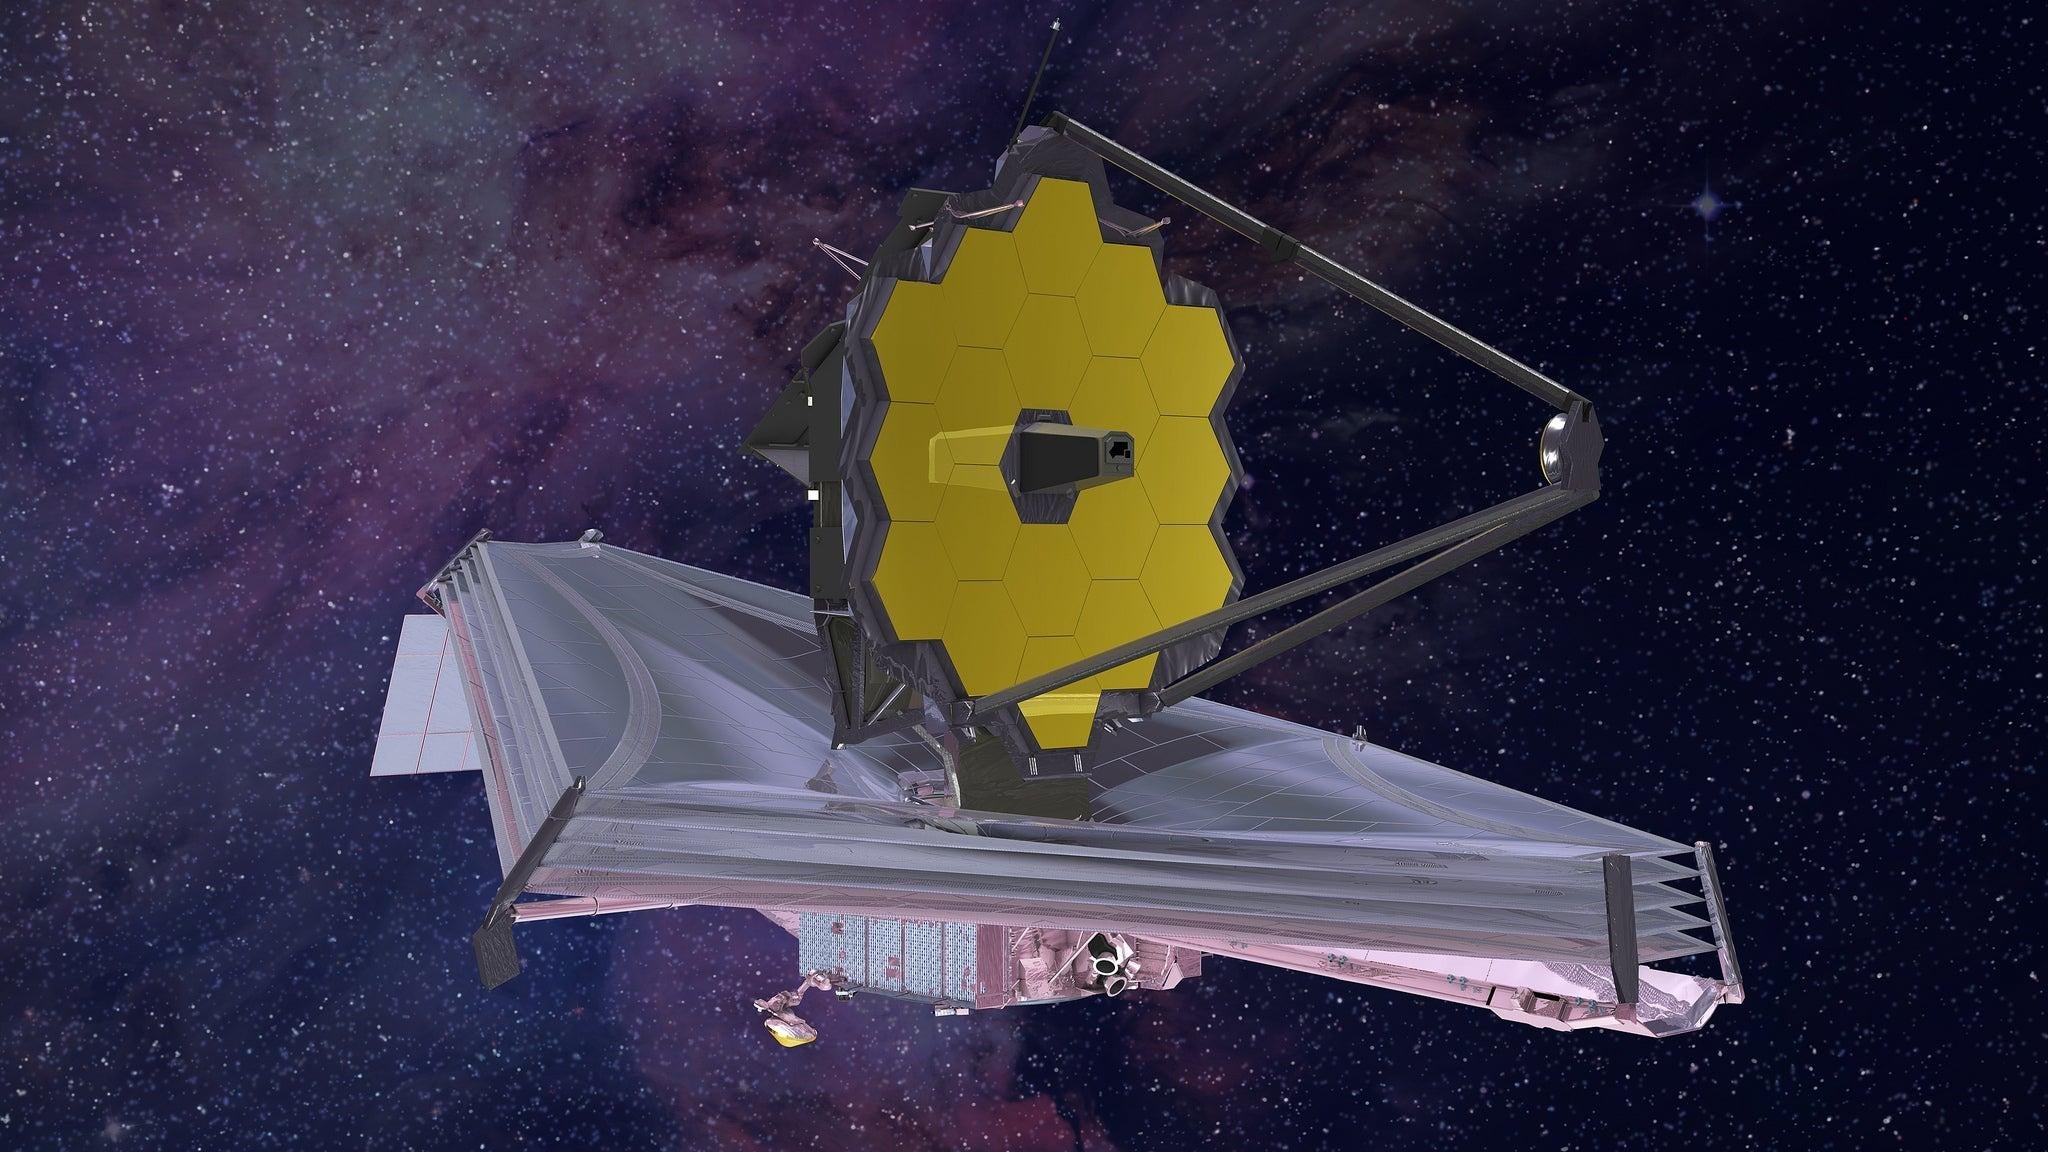 Artist's conception of the fully deployed Webb Space Telescope. (Image: NASA)